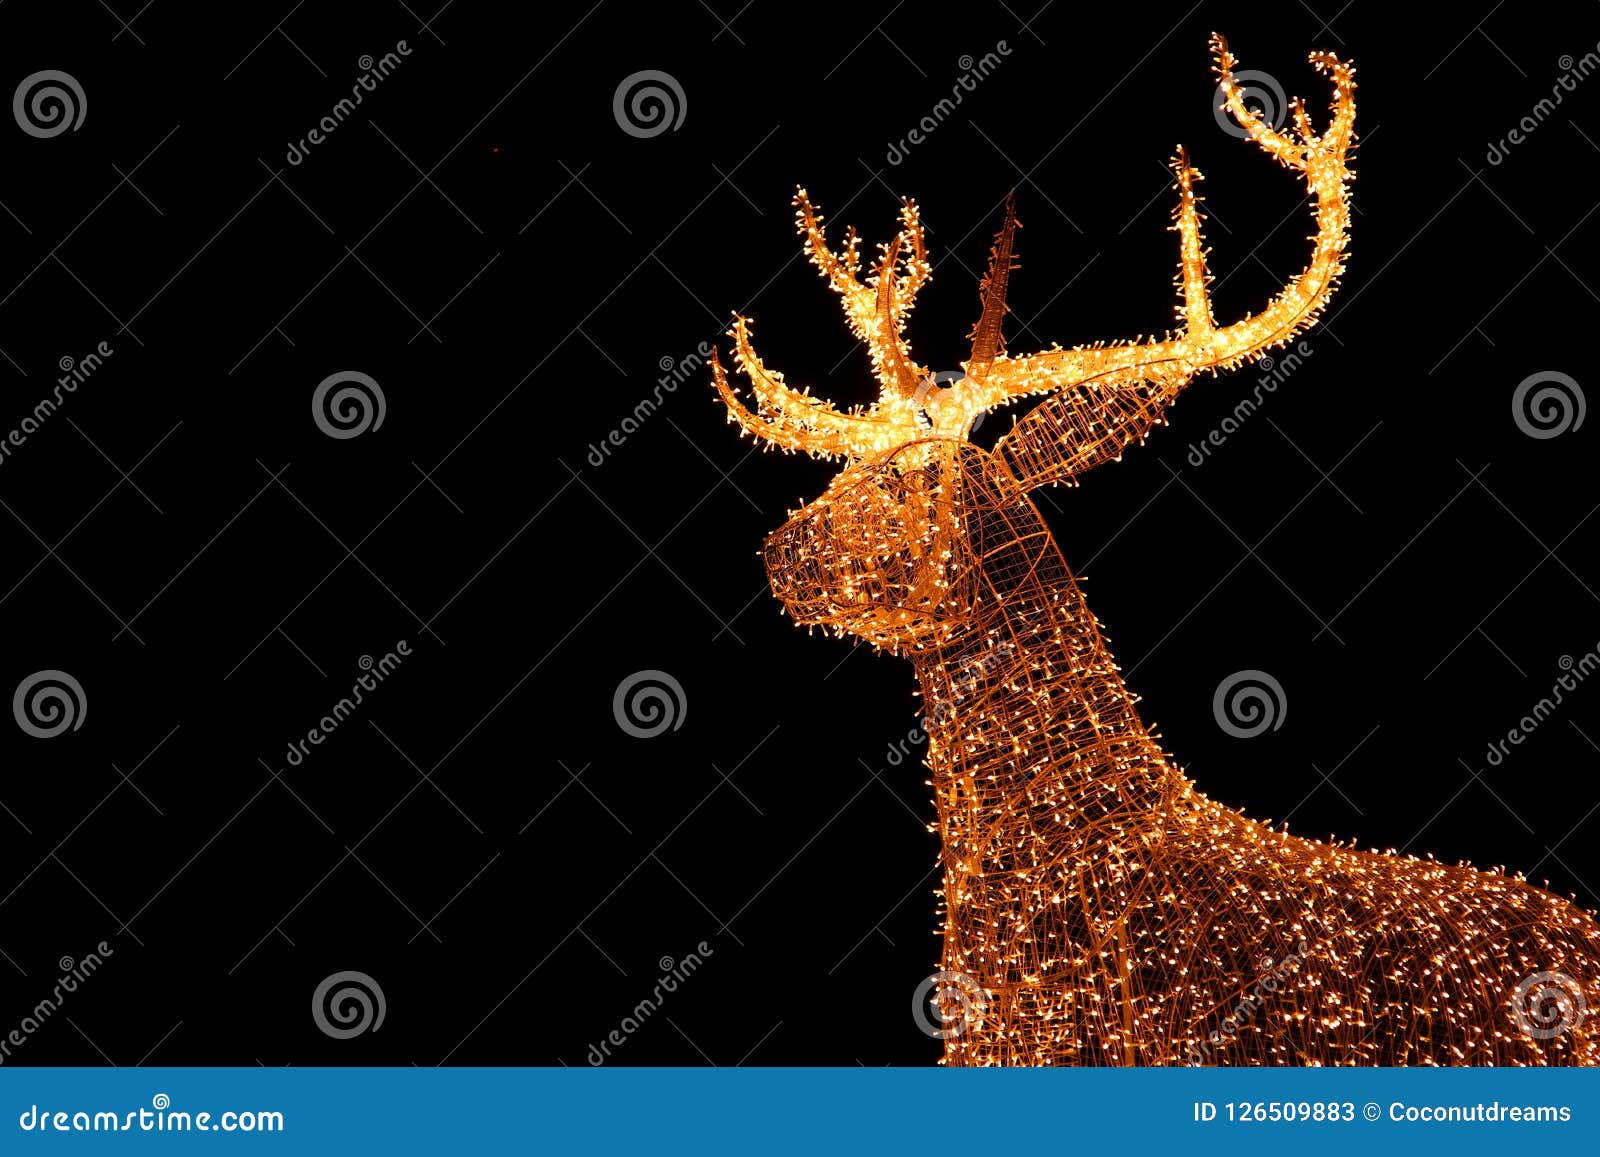 Illuminated Led String Gold Giant Reindeer Of Outdoor Christmas